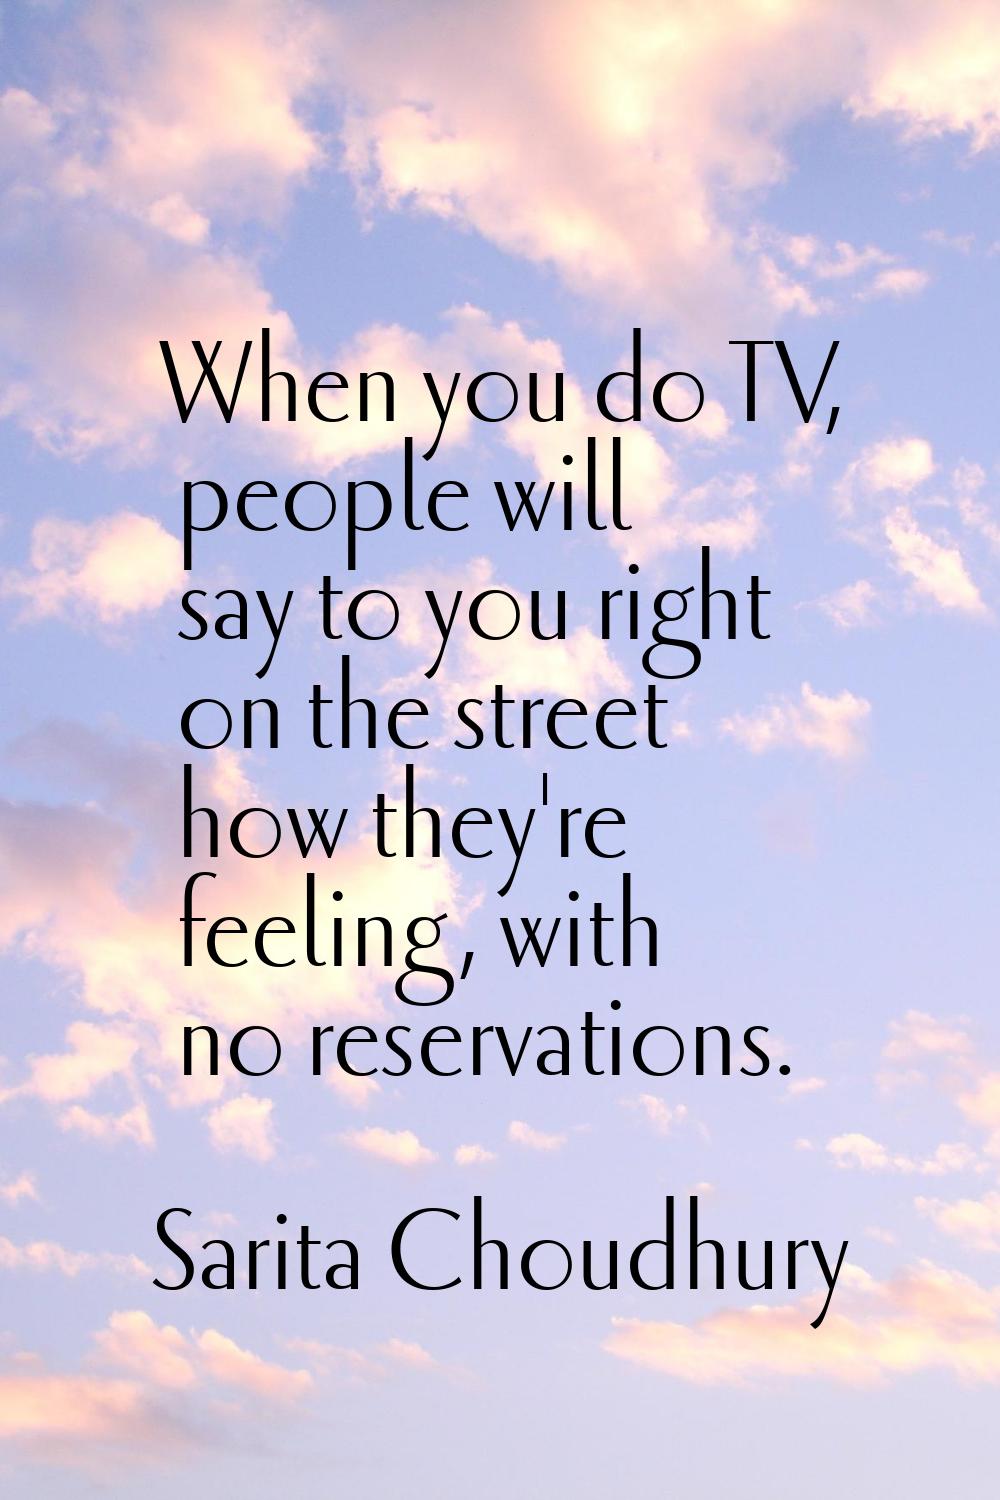 When you do TV, people will say to you right on the street how they're feeling, with no reservation